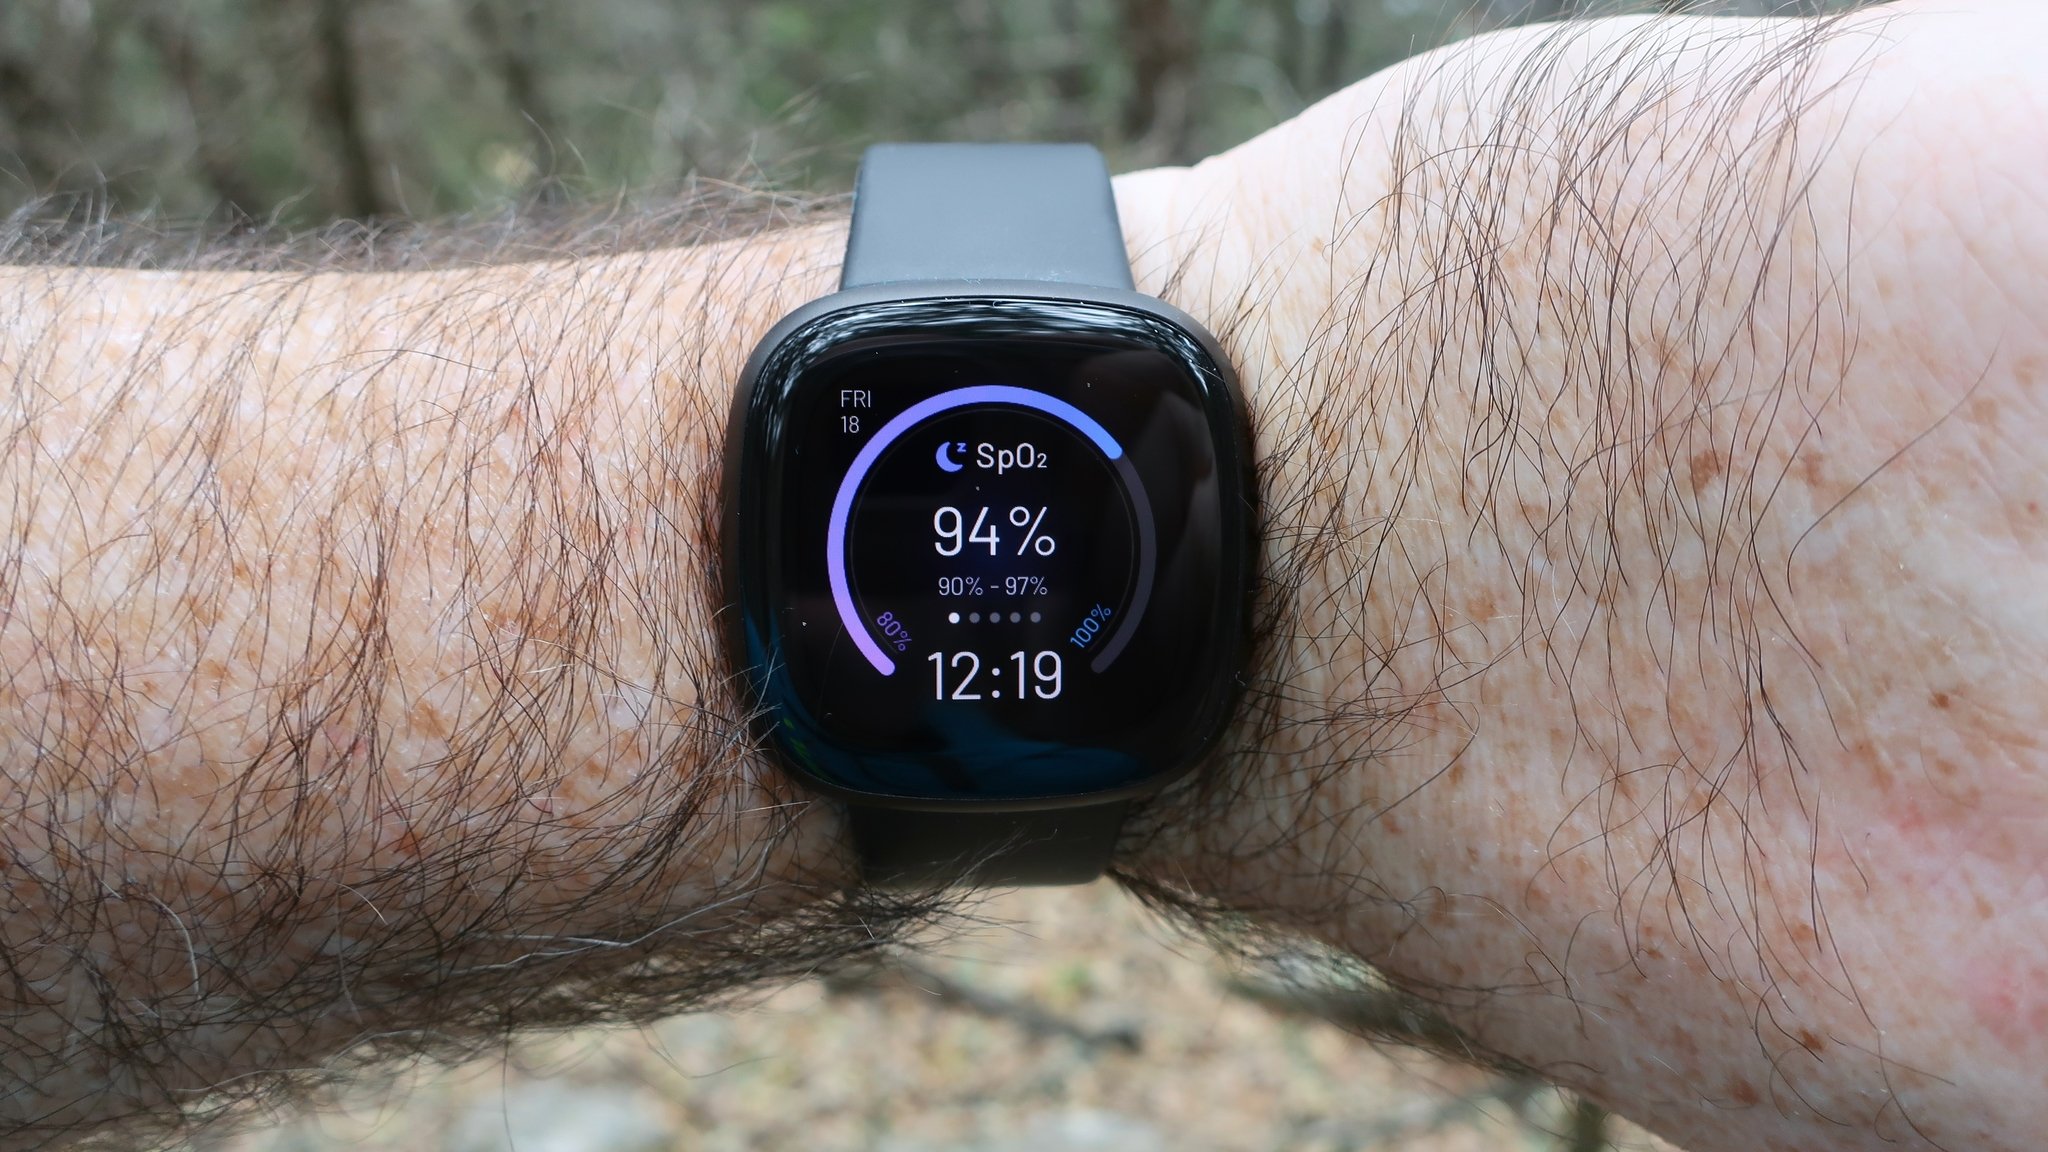 OnePlus Watch vs. Fitbit Versa 3: Which should you buy?